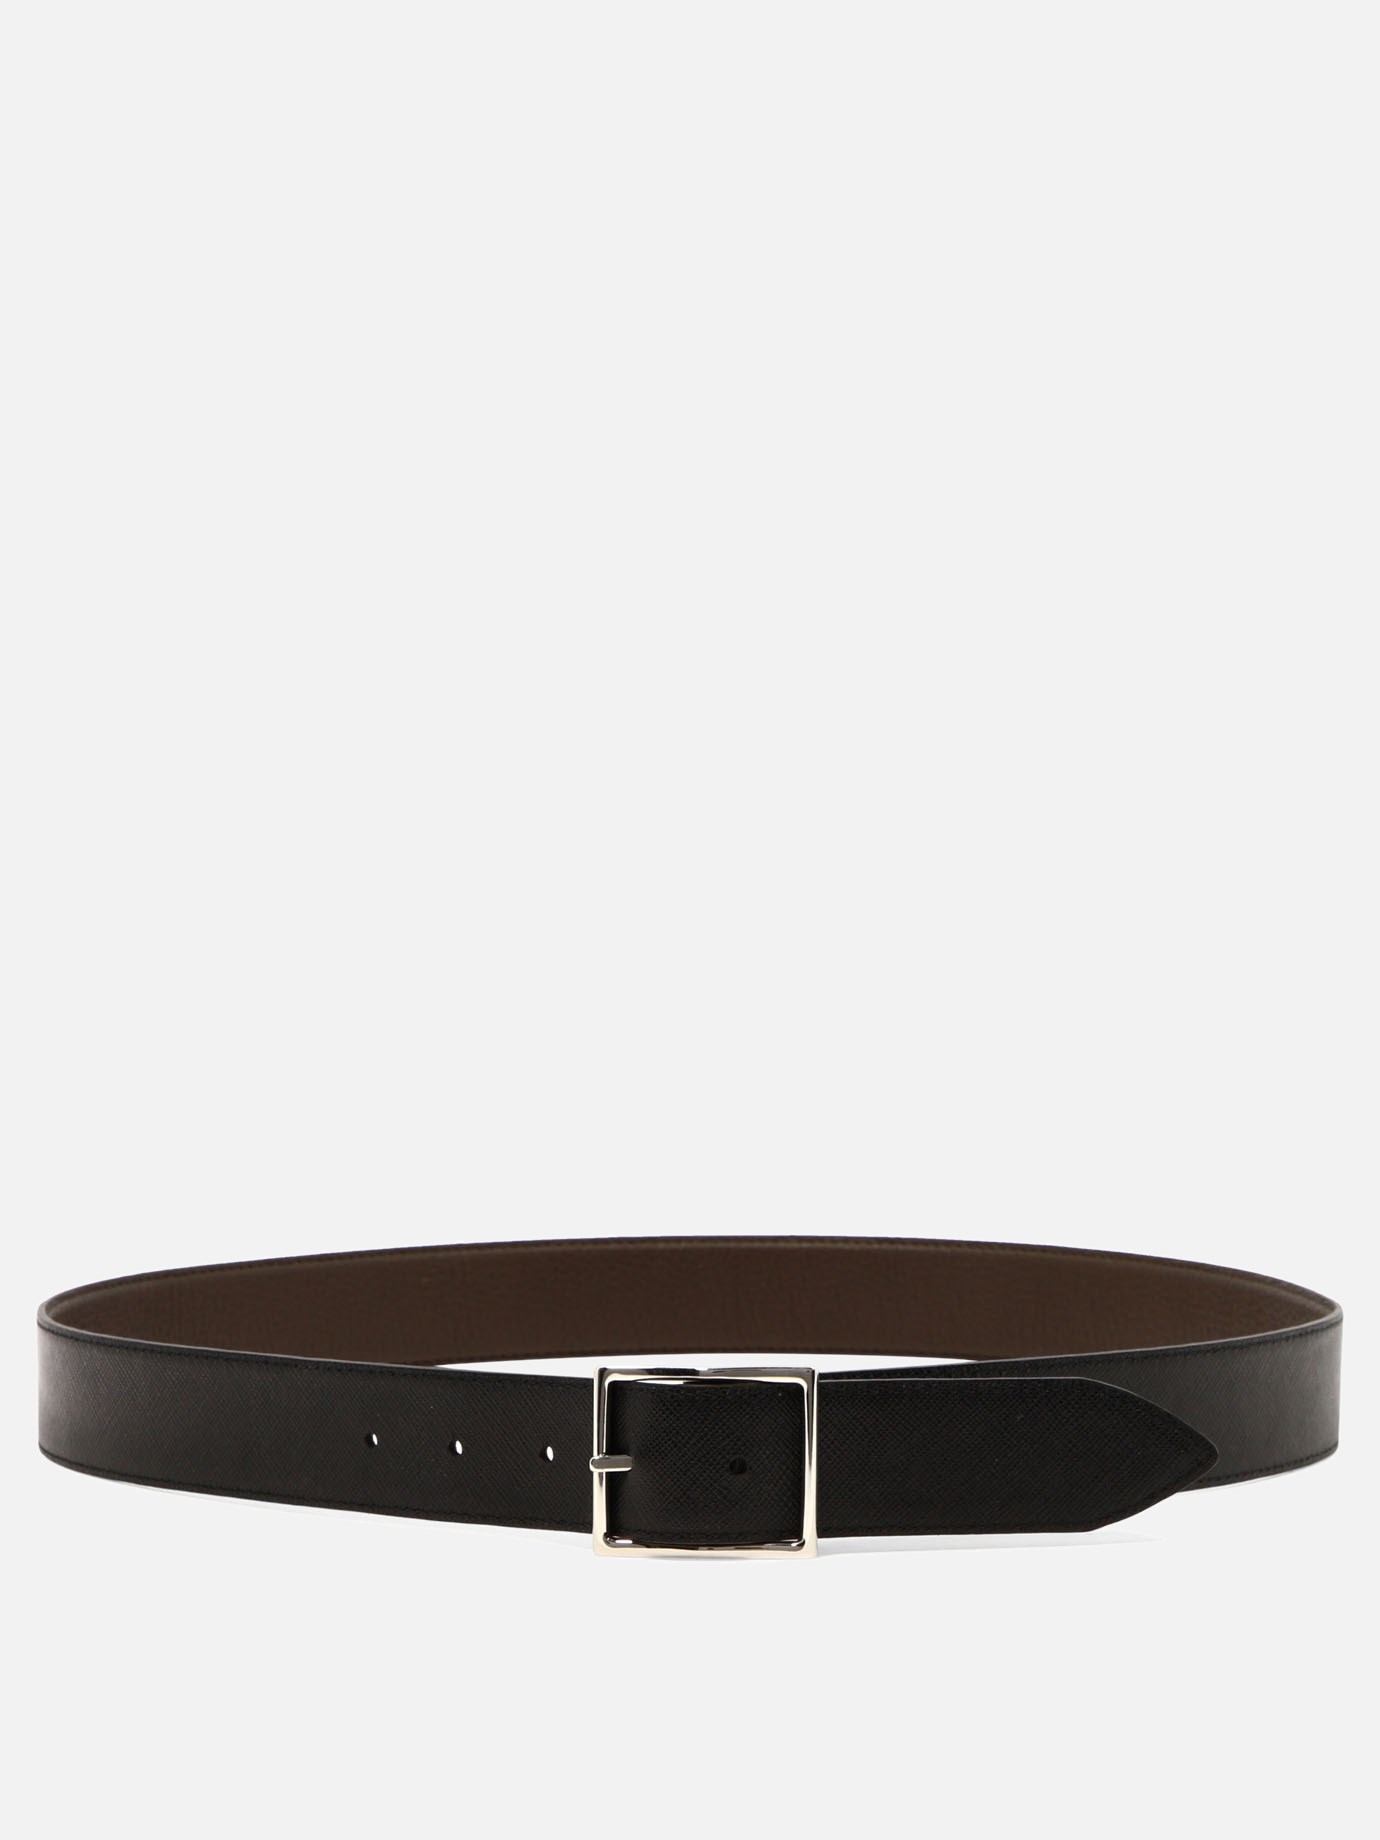 Reversible belt by Orciani